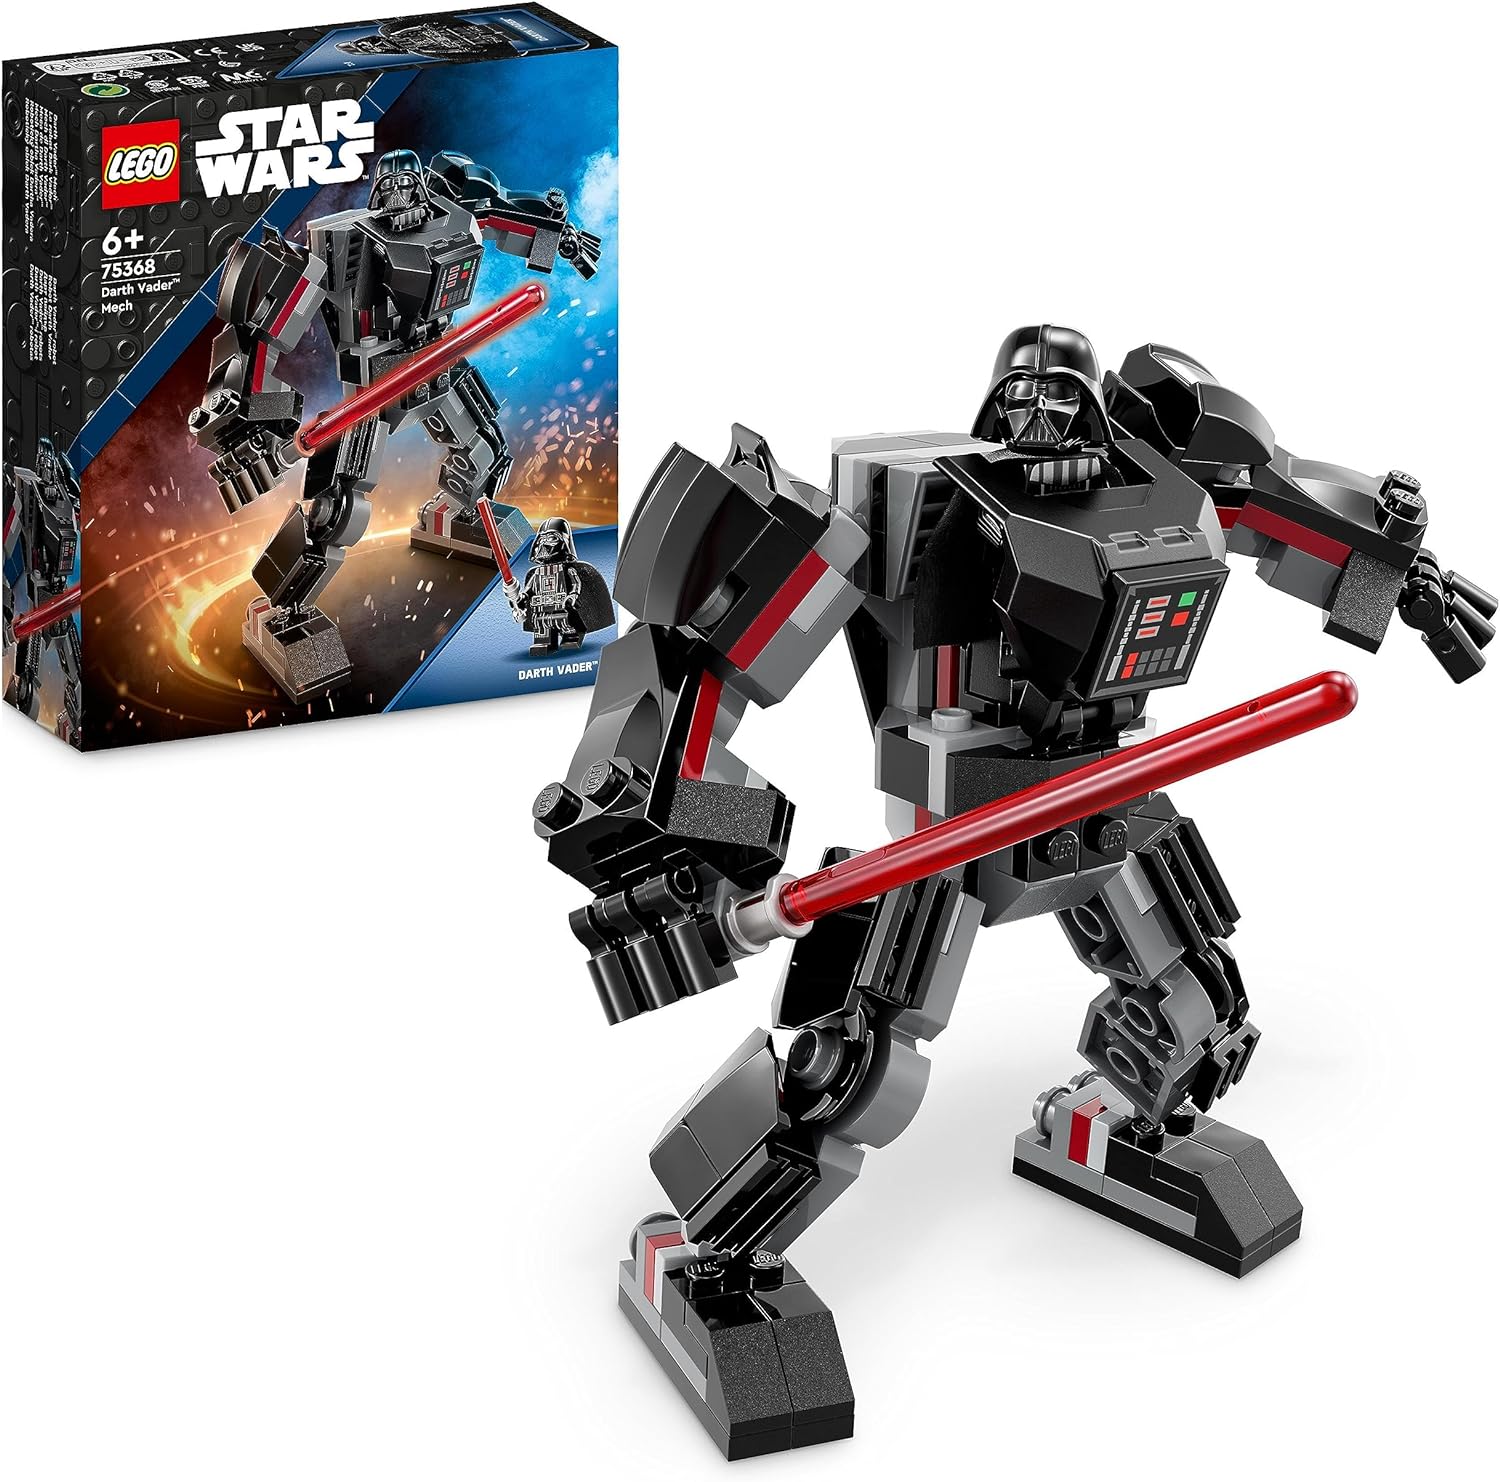 LEGO 75368 Star Wars Darth Vader Mech, Buildable Action Figure Model with Joint Parts, Mini Figure Cockpit and Large Red Lightsaber, Collectable Toy for Children, Boys, Girls from 6 Years
